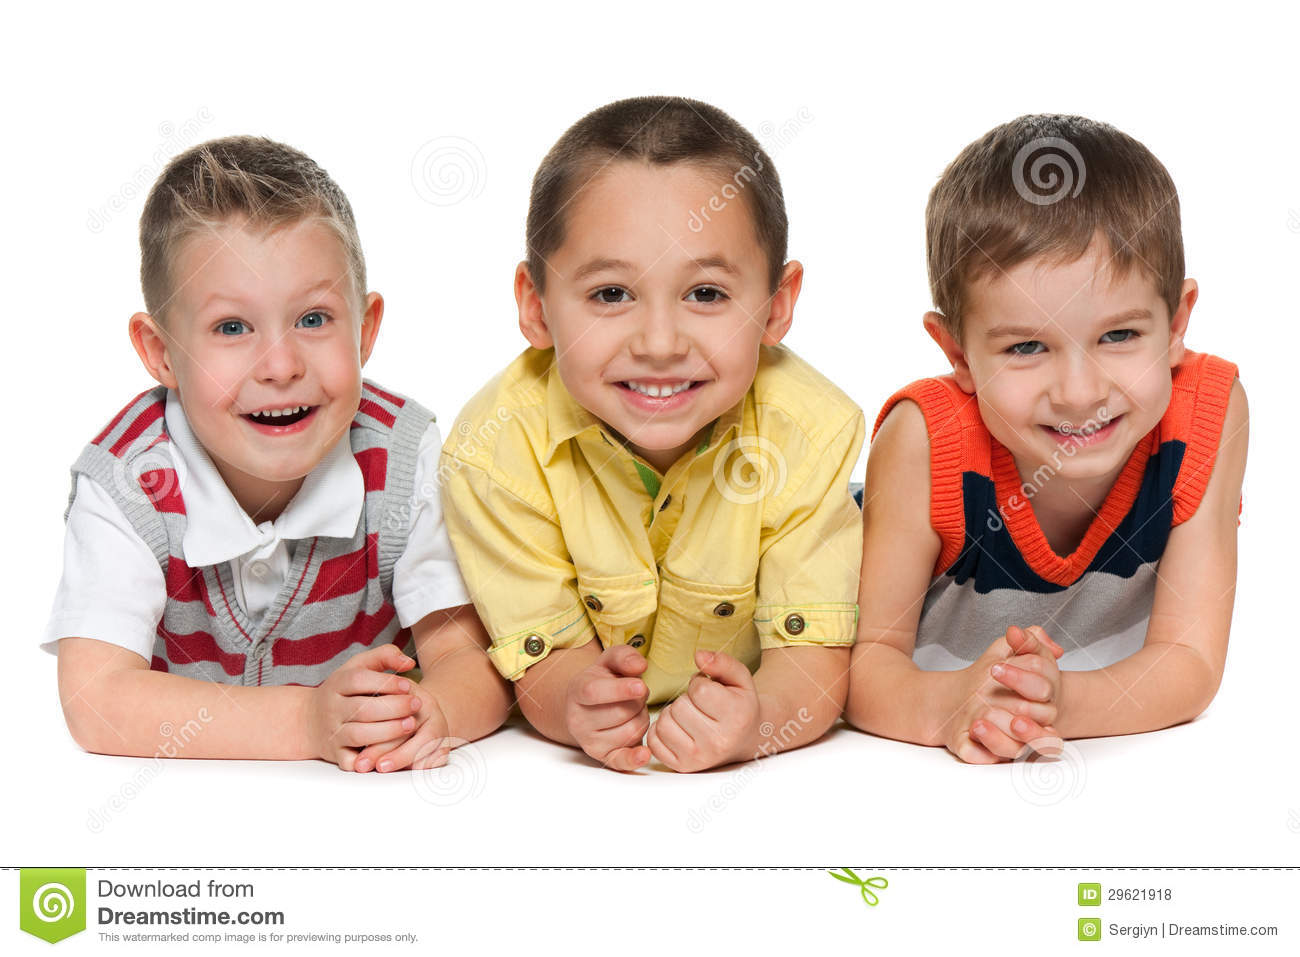 Three Laughing Friends Royalty Free Stock Photos   Image  29621918